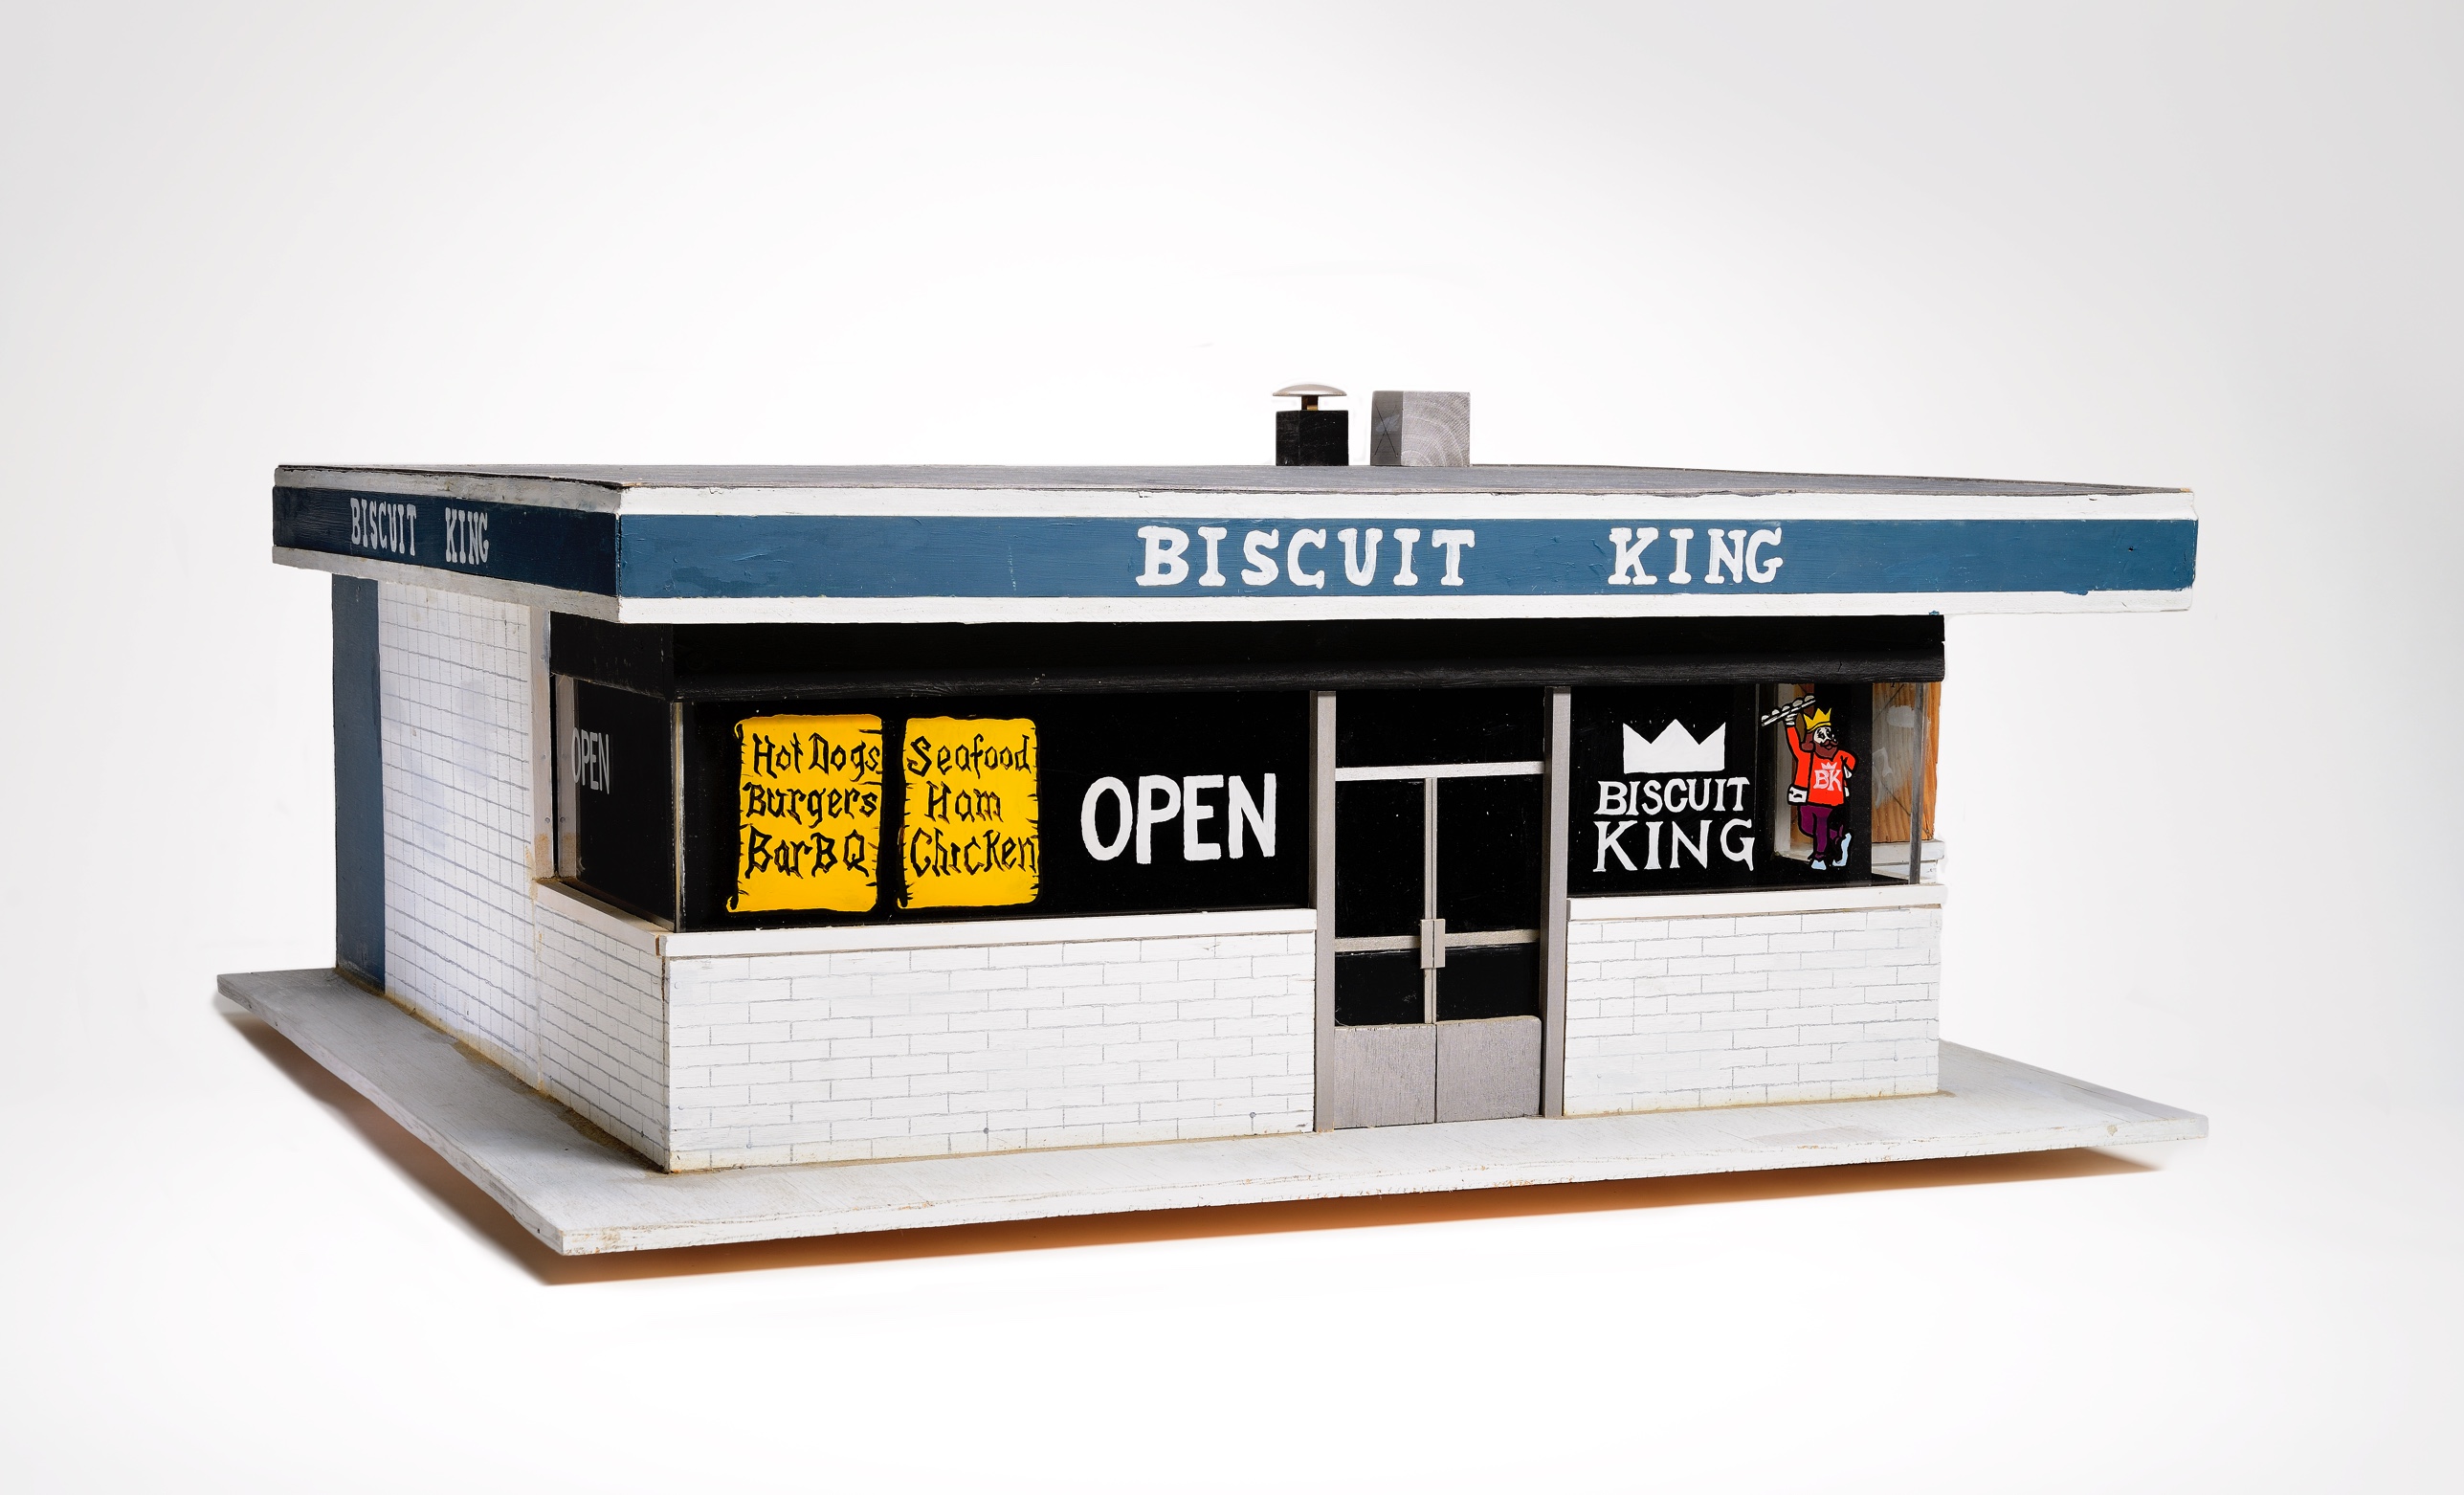 Jerstin Crosby and Bill Thelen, Biscuit King, 2007